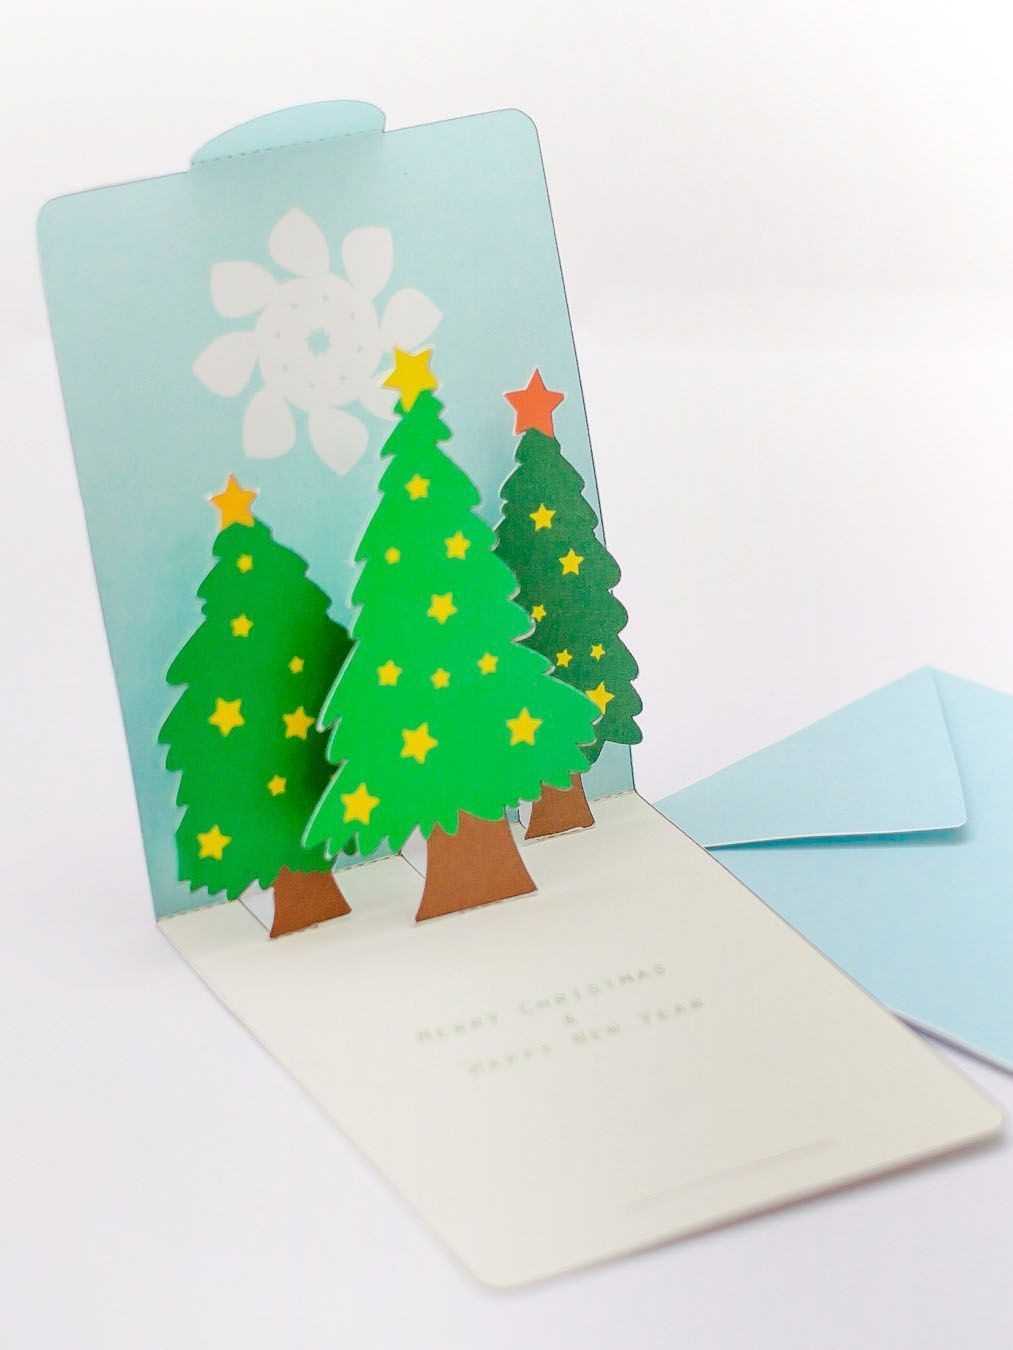 Tree Papercraft Free Pop Up Card Template Mookeep Origami For Pop Up Tree Card Template